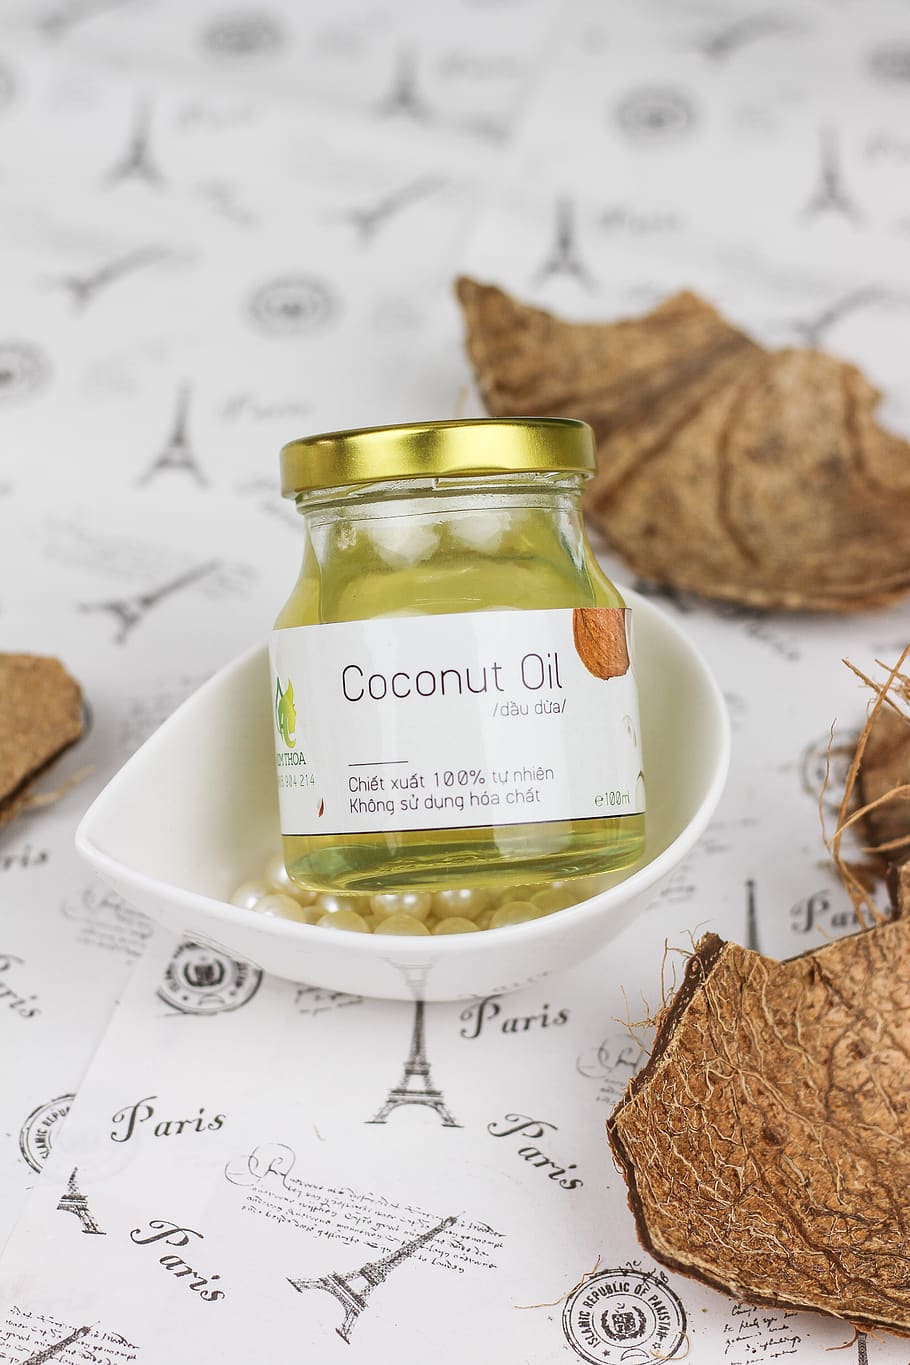 coconut oil, coconut, melons, coconut shell, dried coconut, oil, natural, coconut tree, the bottle, vials of essential oils